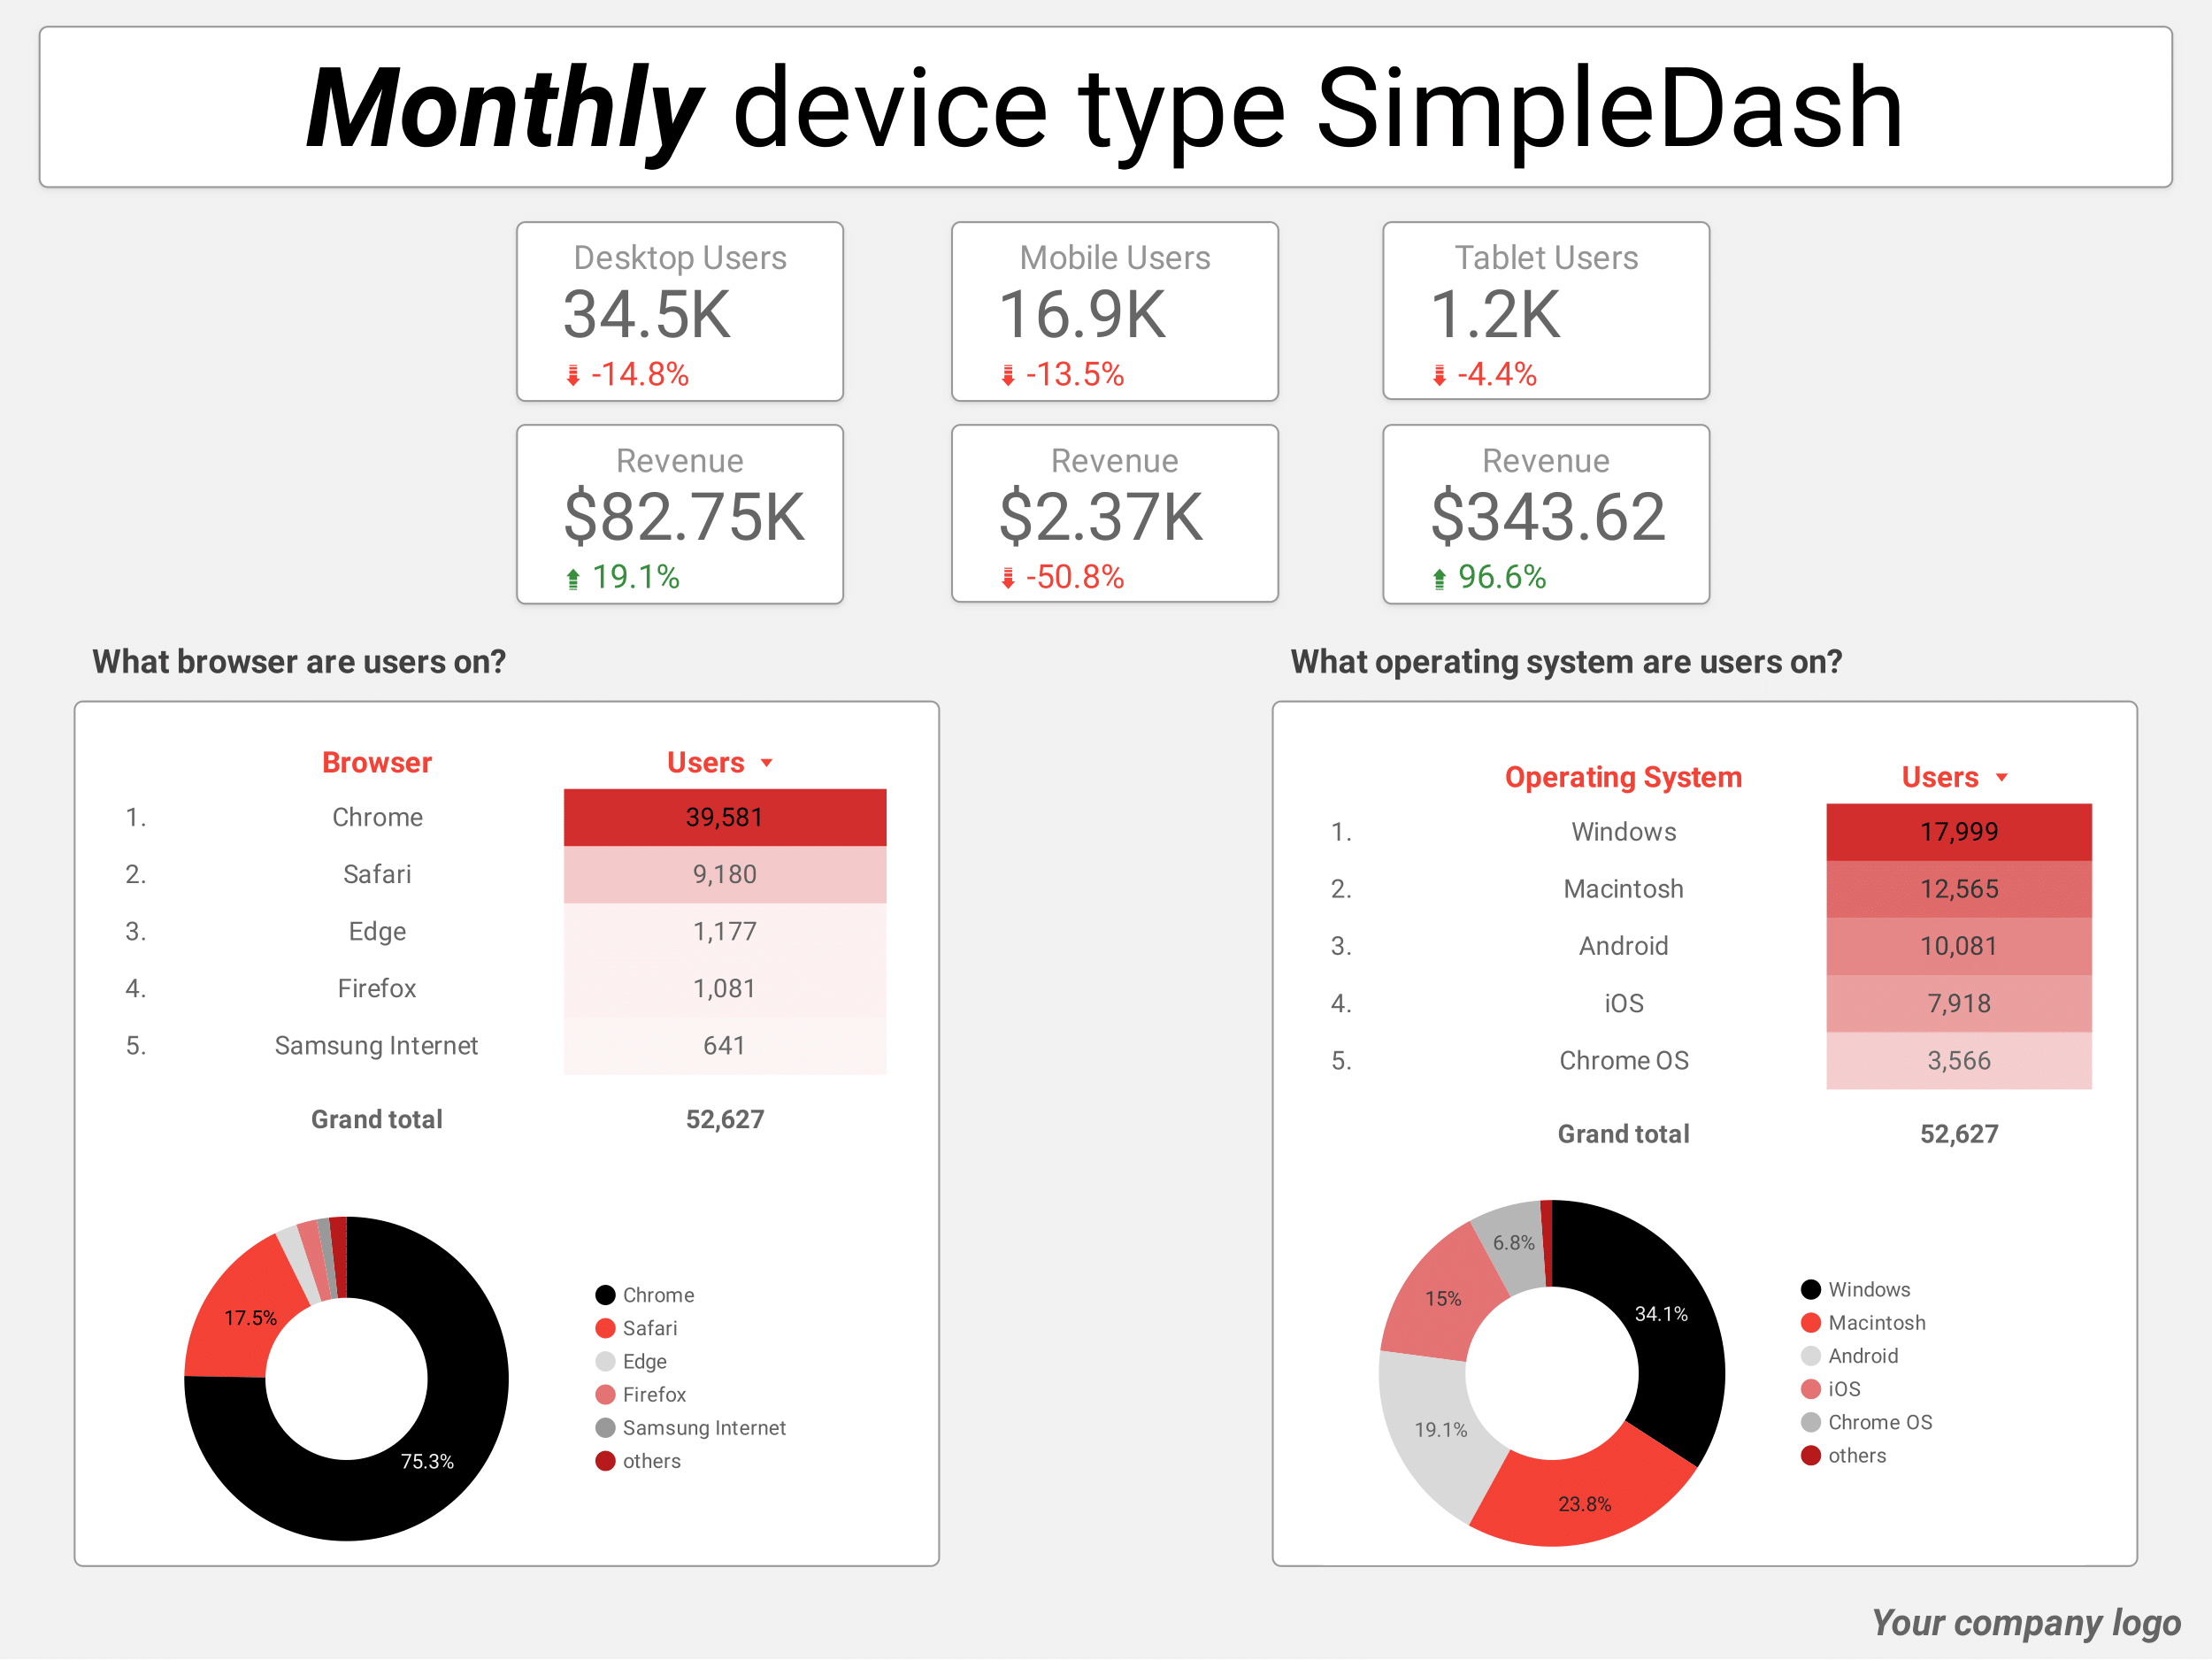 DST_E-commerce_SimpleDash_monthly_device-type-1.png